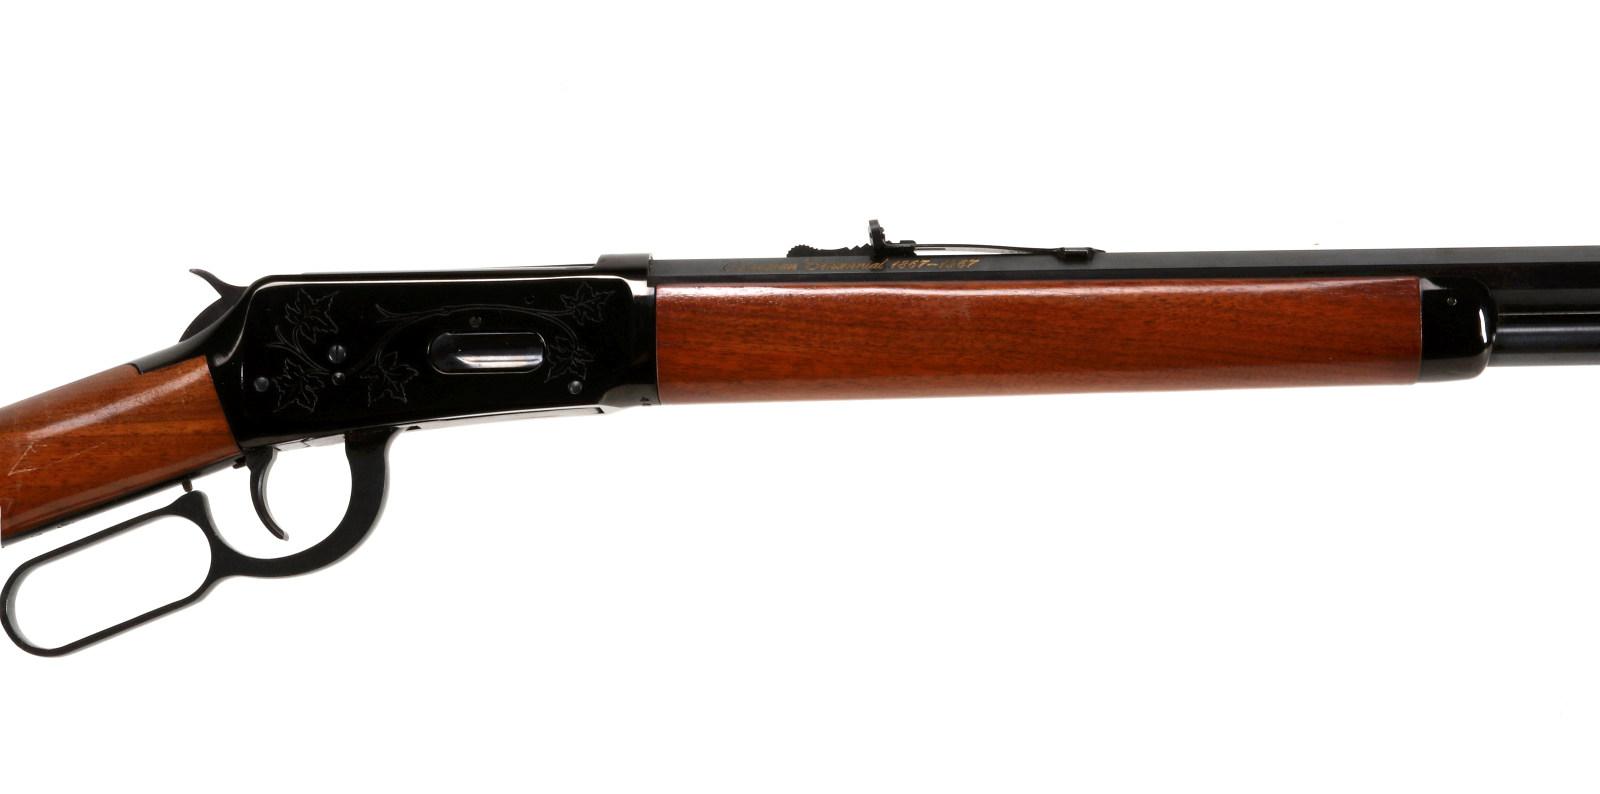 WINCHESTER CANADIAN CENTENNIAL 30-30 LEVER ACTION